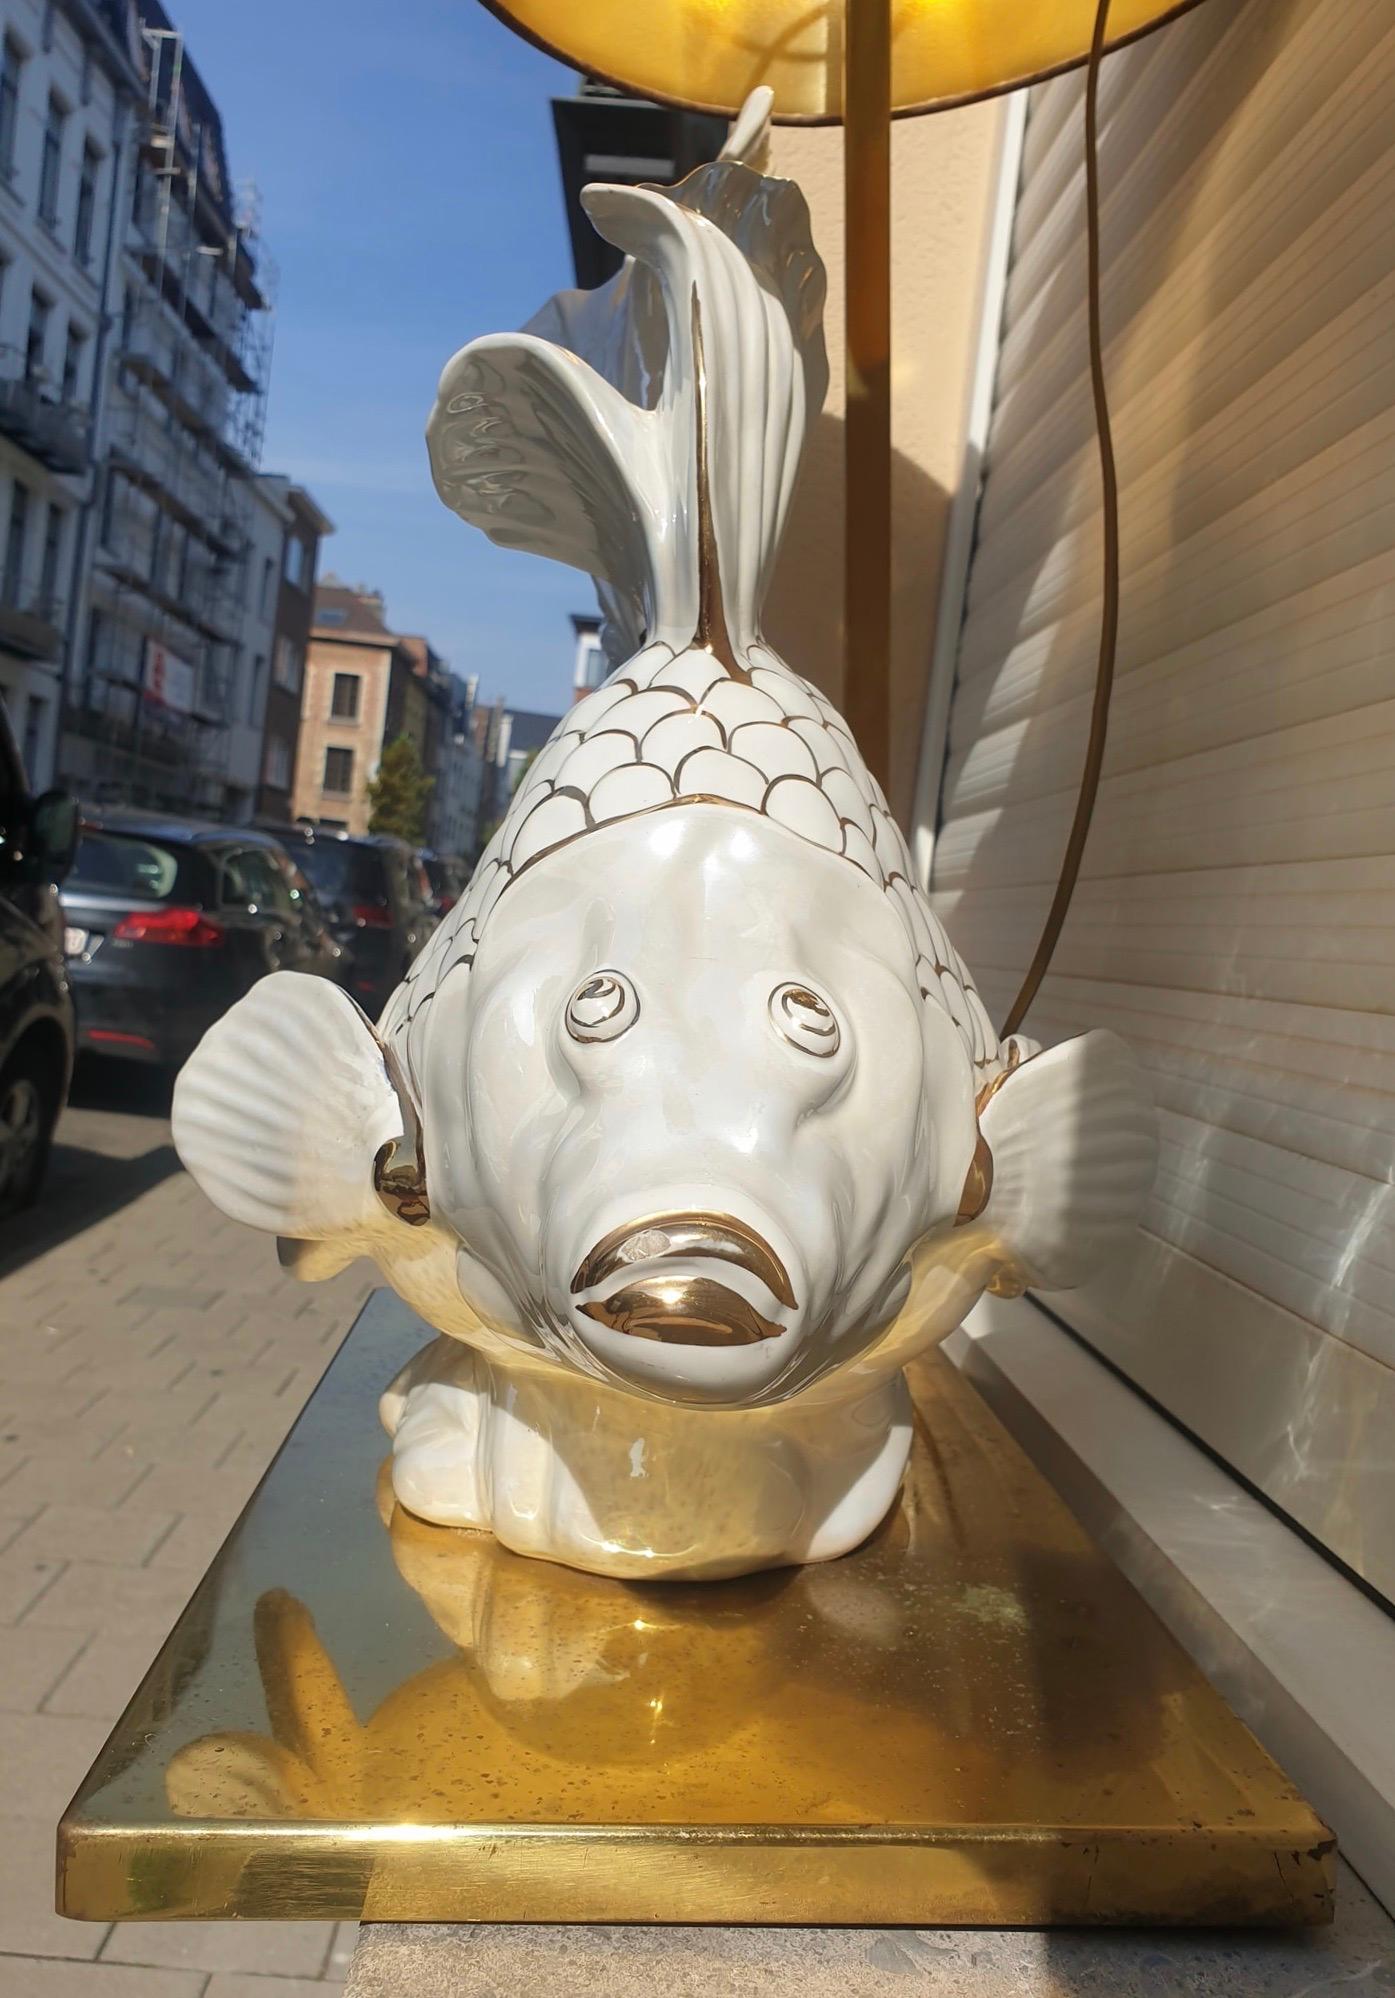 Italian Midcentury Big Ceramic Fish Lamp with Brass Details, 1970s For Sale 5